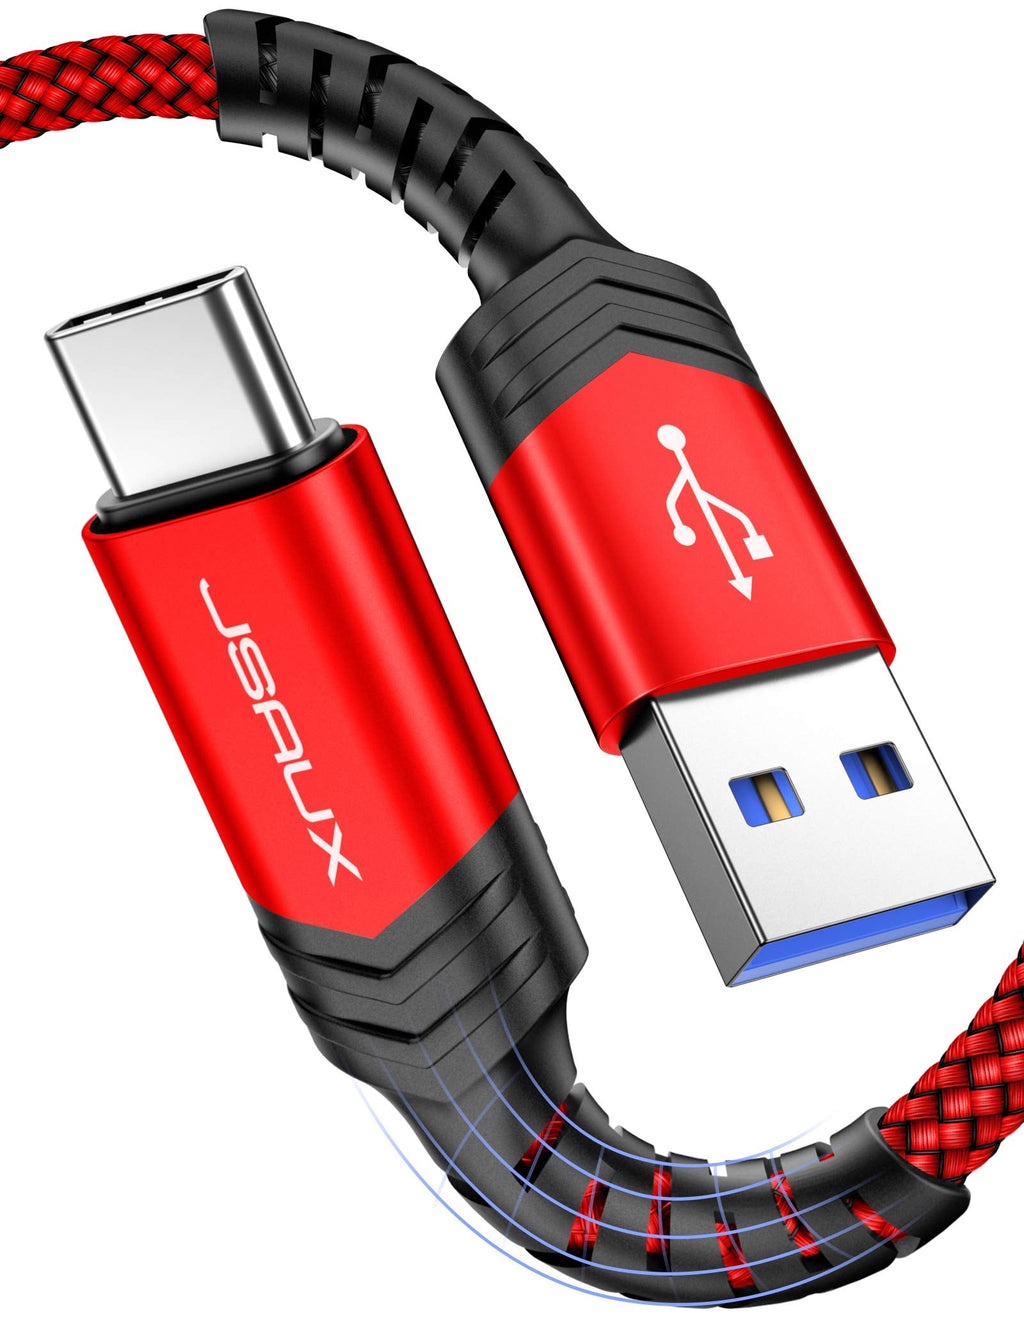  [AUSTRALIA] - JSAUX USB C Cable 2-Pack 6.6ft, USB 3.0 to Type-C Charger Cable 3A Fast Charging 5Gbps Data Sync Compatible with Oculus Quest Samsung Galaxy S21 S20 S10 Note LG G6 G5 PS5 Controller Switch Xbox-Red Red